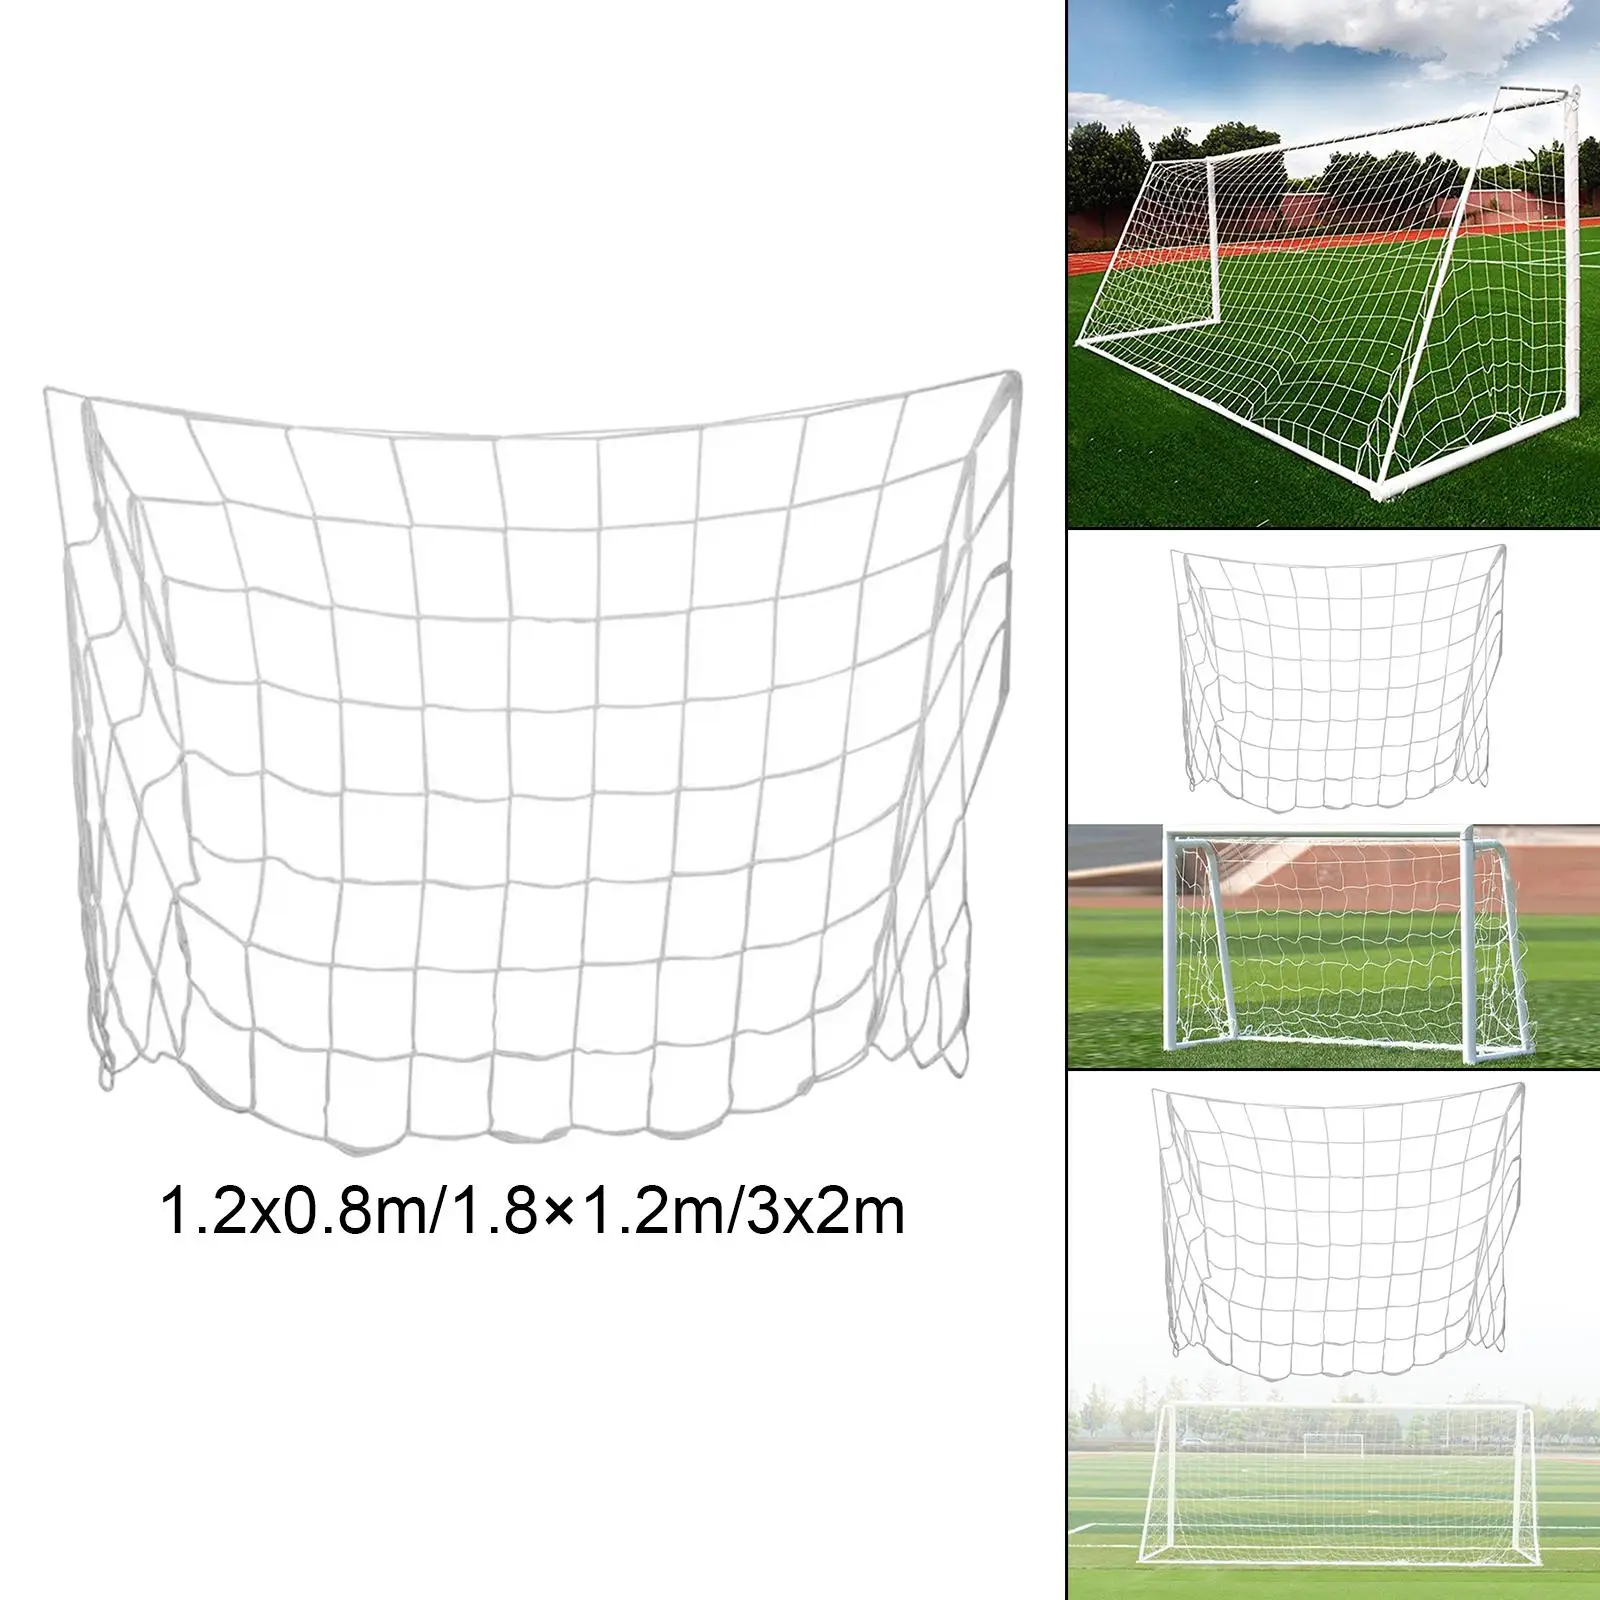 Portable Soccer Goal Net Replacement Accessories Polyethylene Netting White Football Net for Training Competition Match